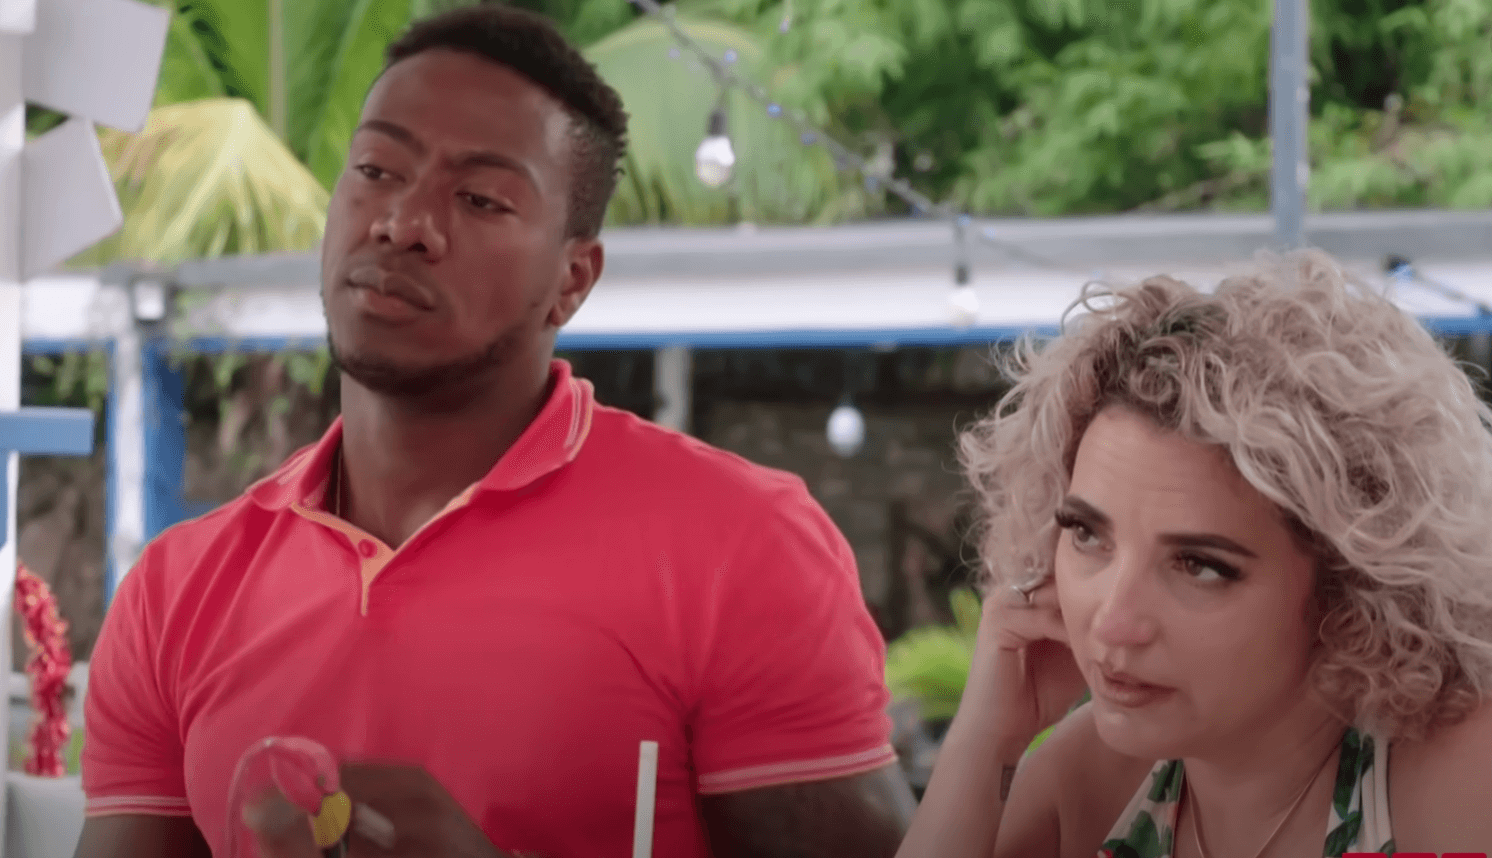 '90 Day Fiancé: The Other Way' stars Yohan and Daniele sitting next to each other